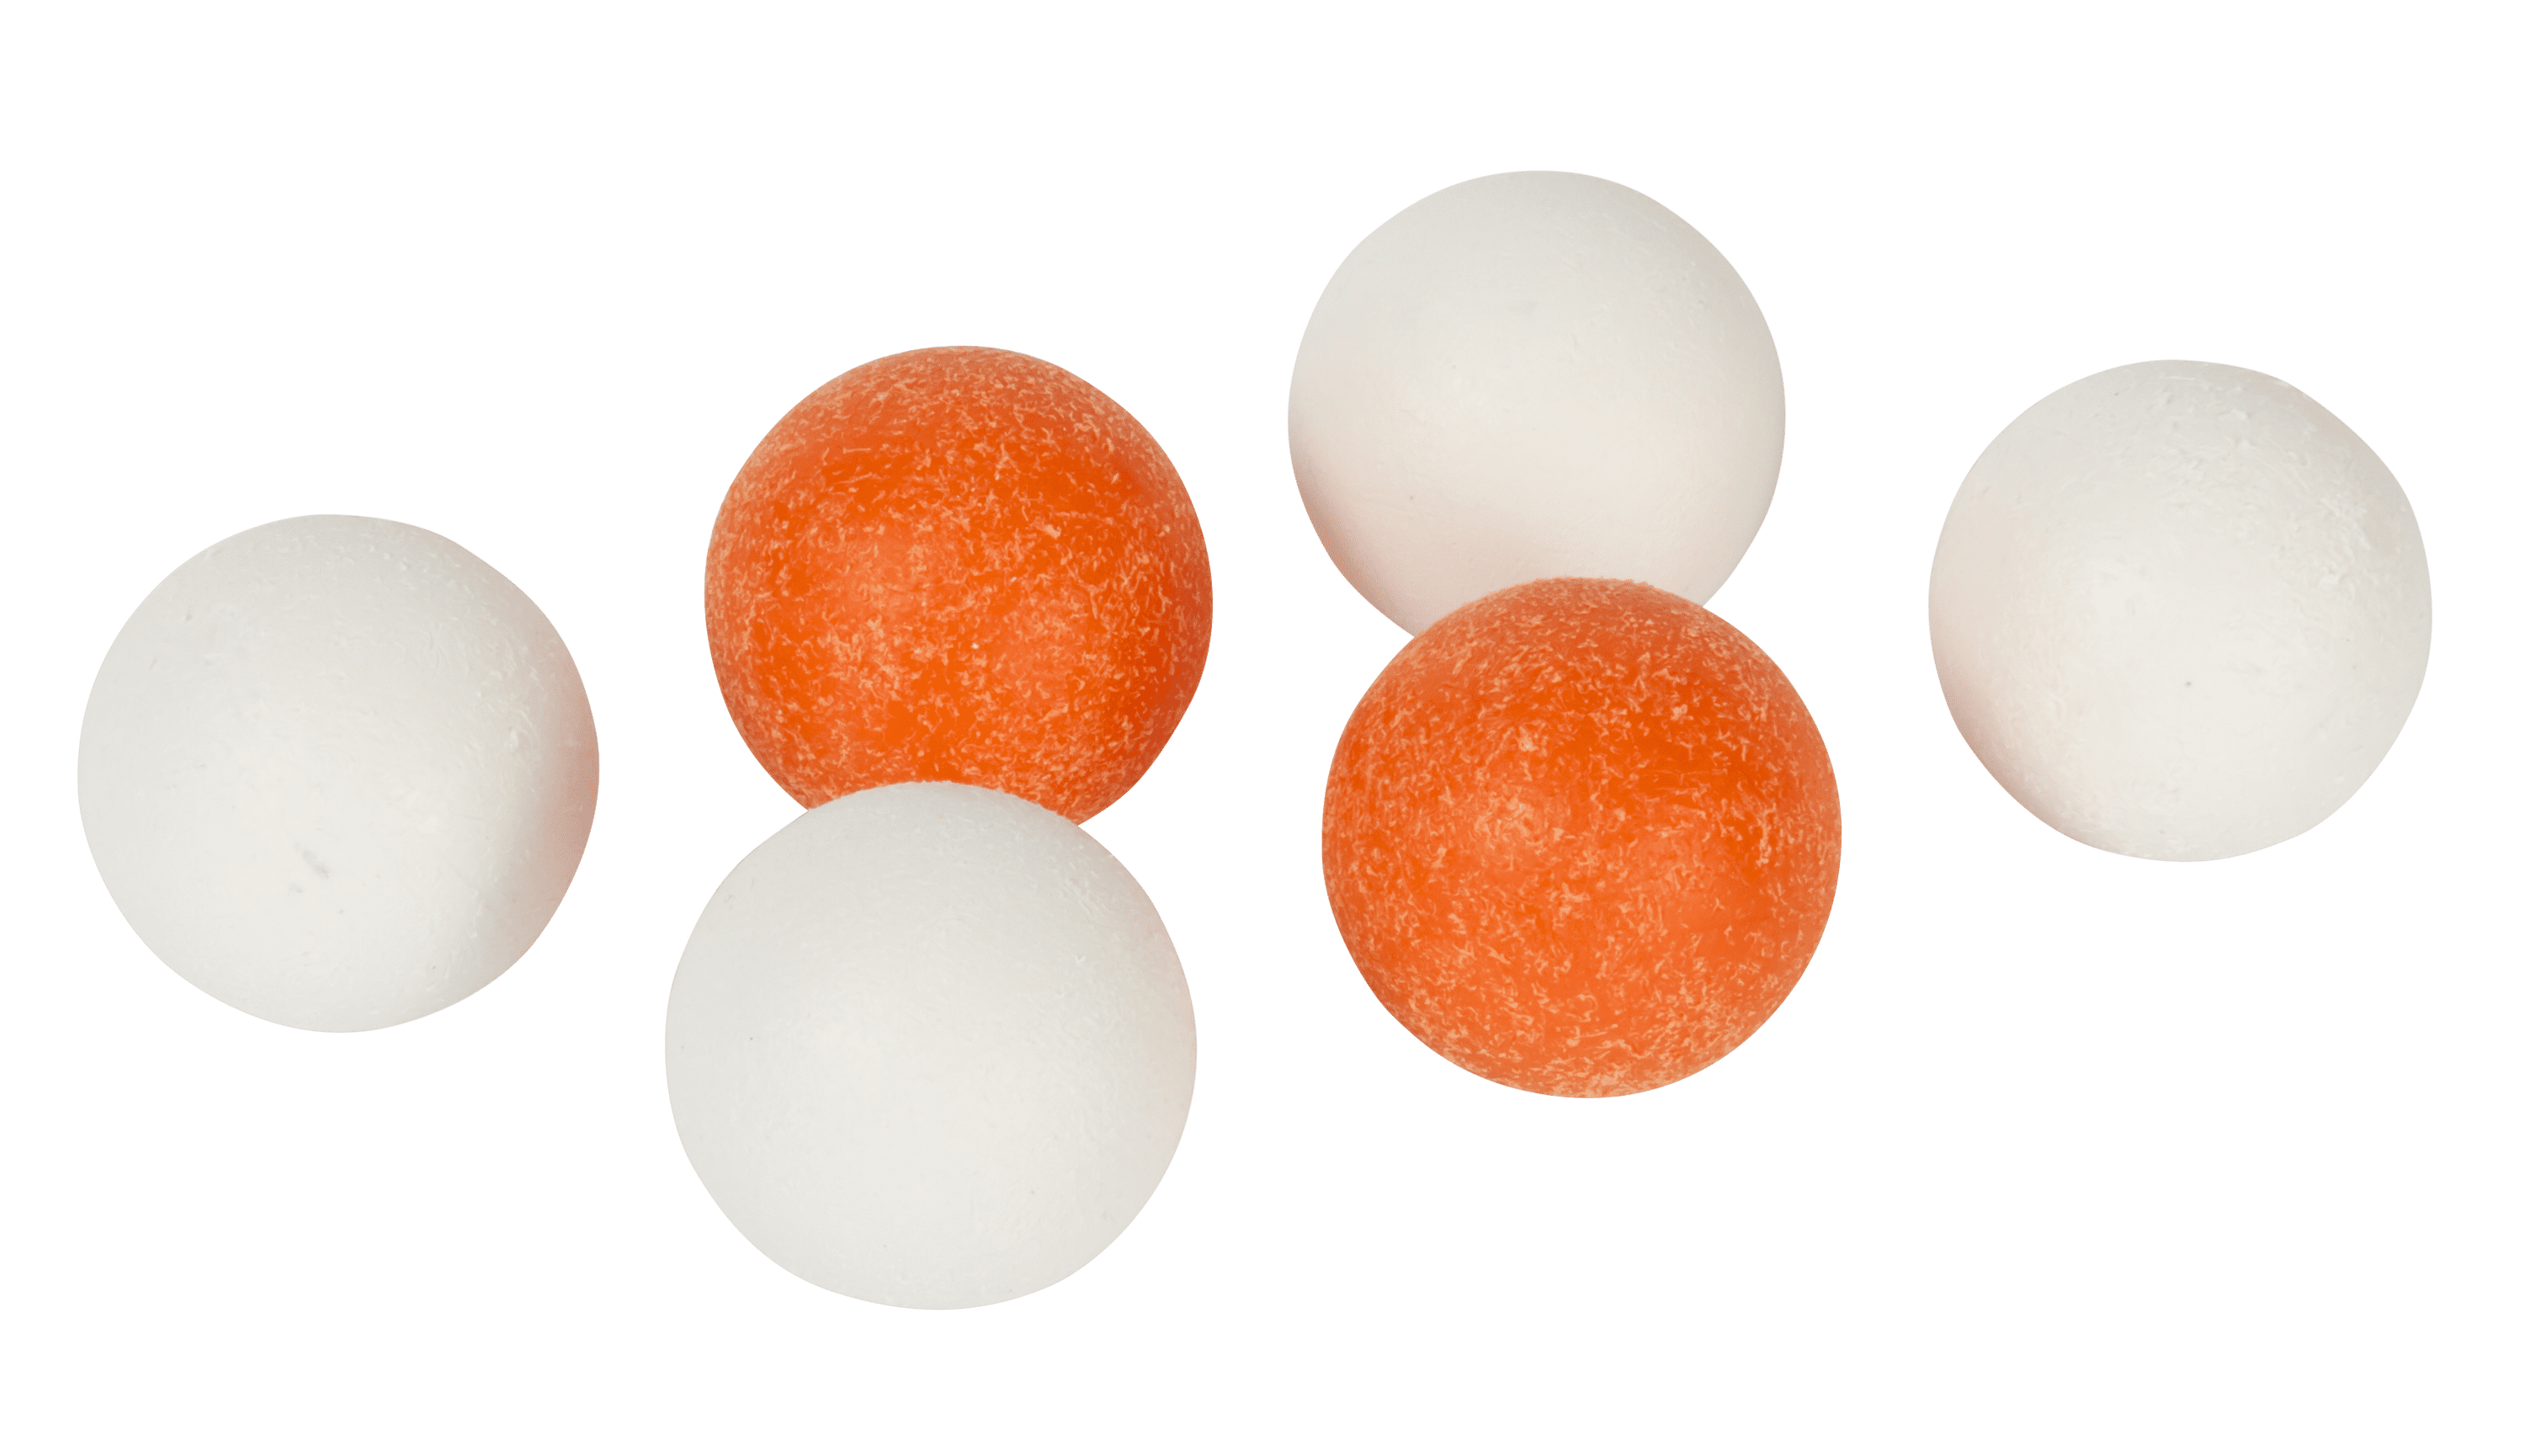 Details about   Lot Of 2 GENUINE Eastpoint Tournament Foosballs 4 Orange and 8 White 12 total 